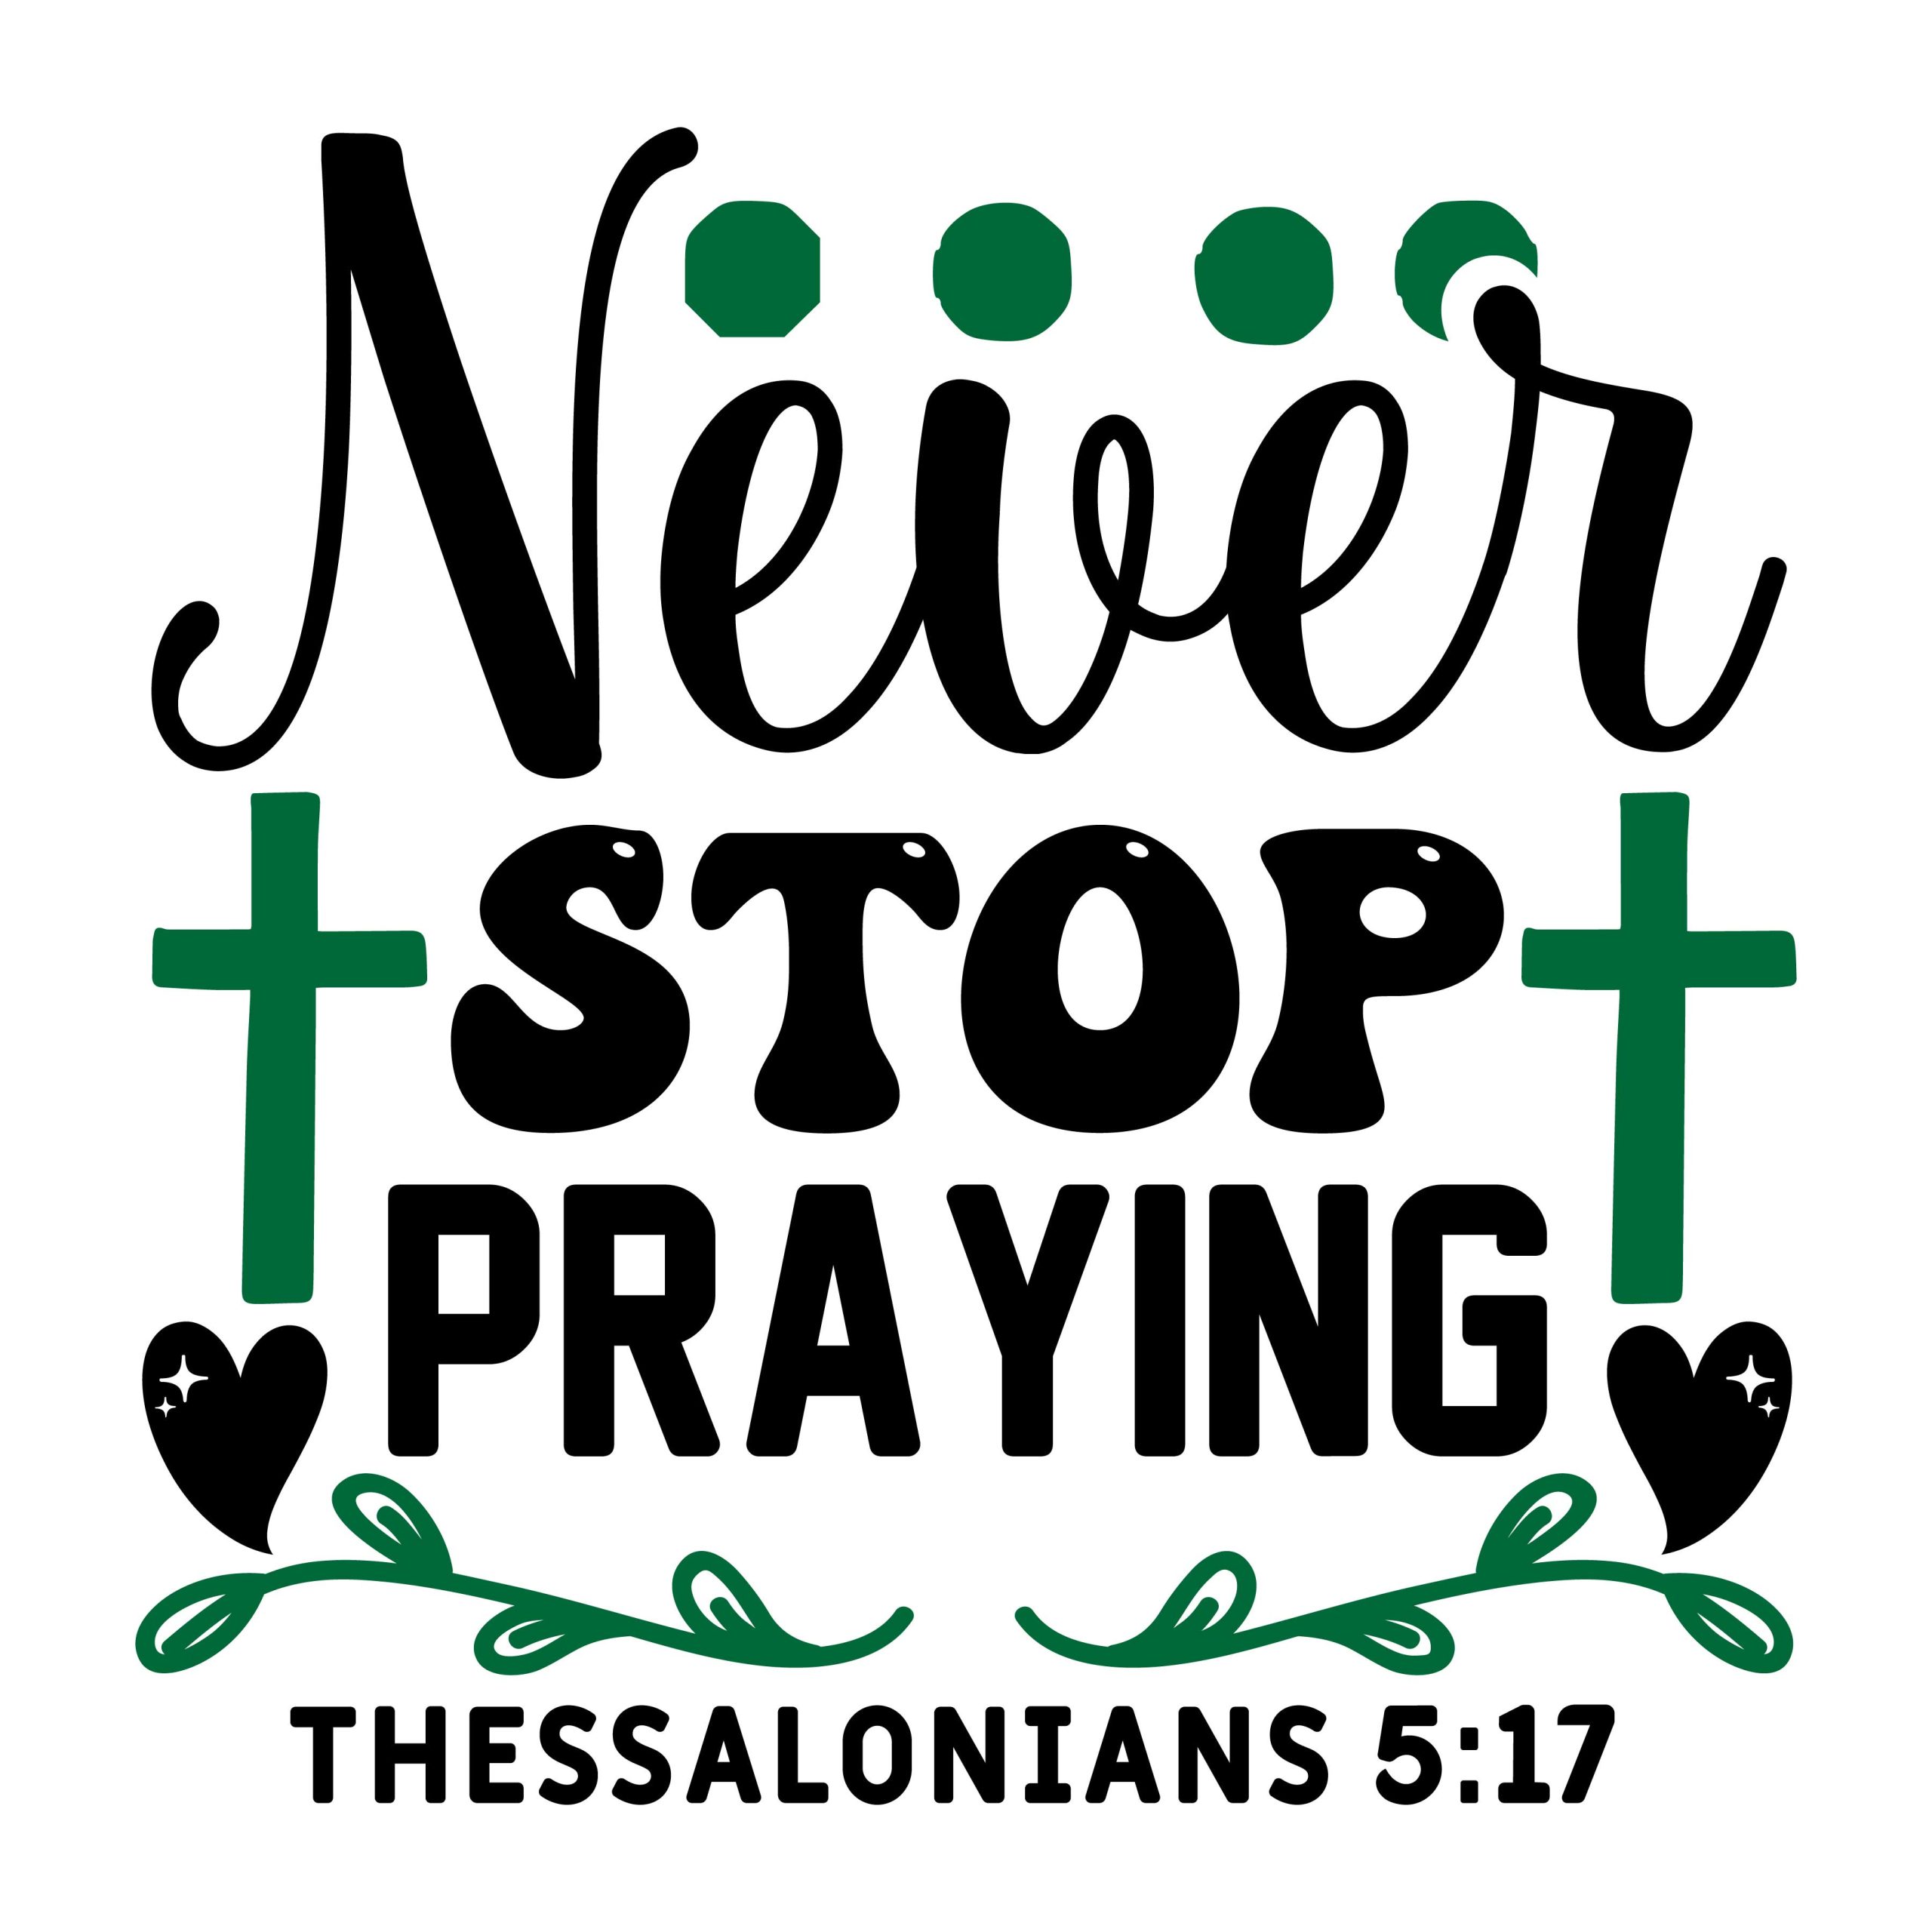 Never stop praying Thessalonians 5:17, bible verses, scripture verses, svg files, passages, sayings, cricut designs, silhouette, embroidery, bundle, free cut files, design space, vector